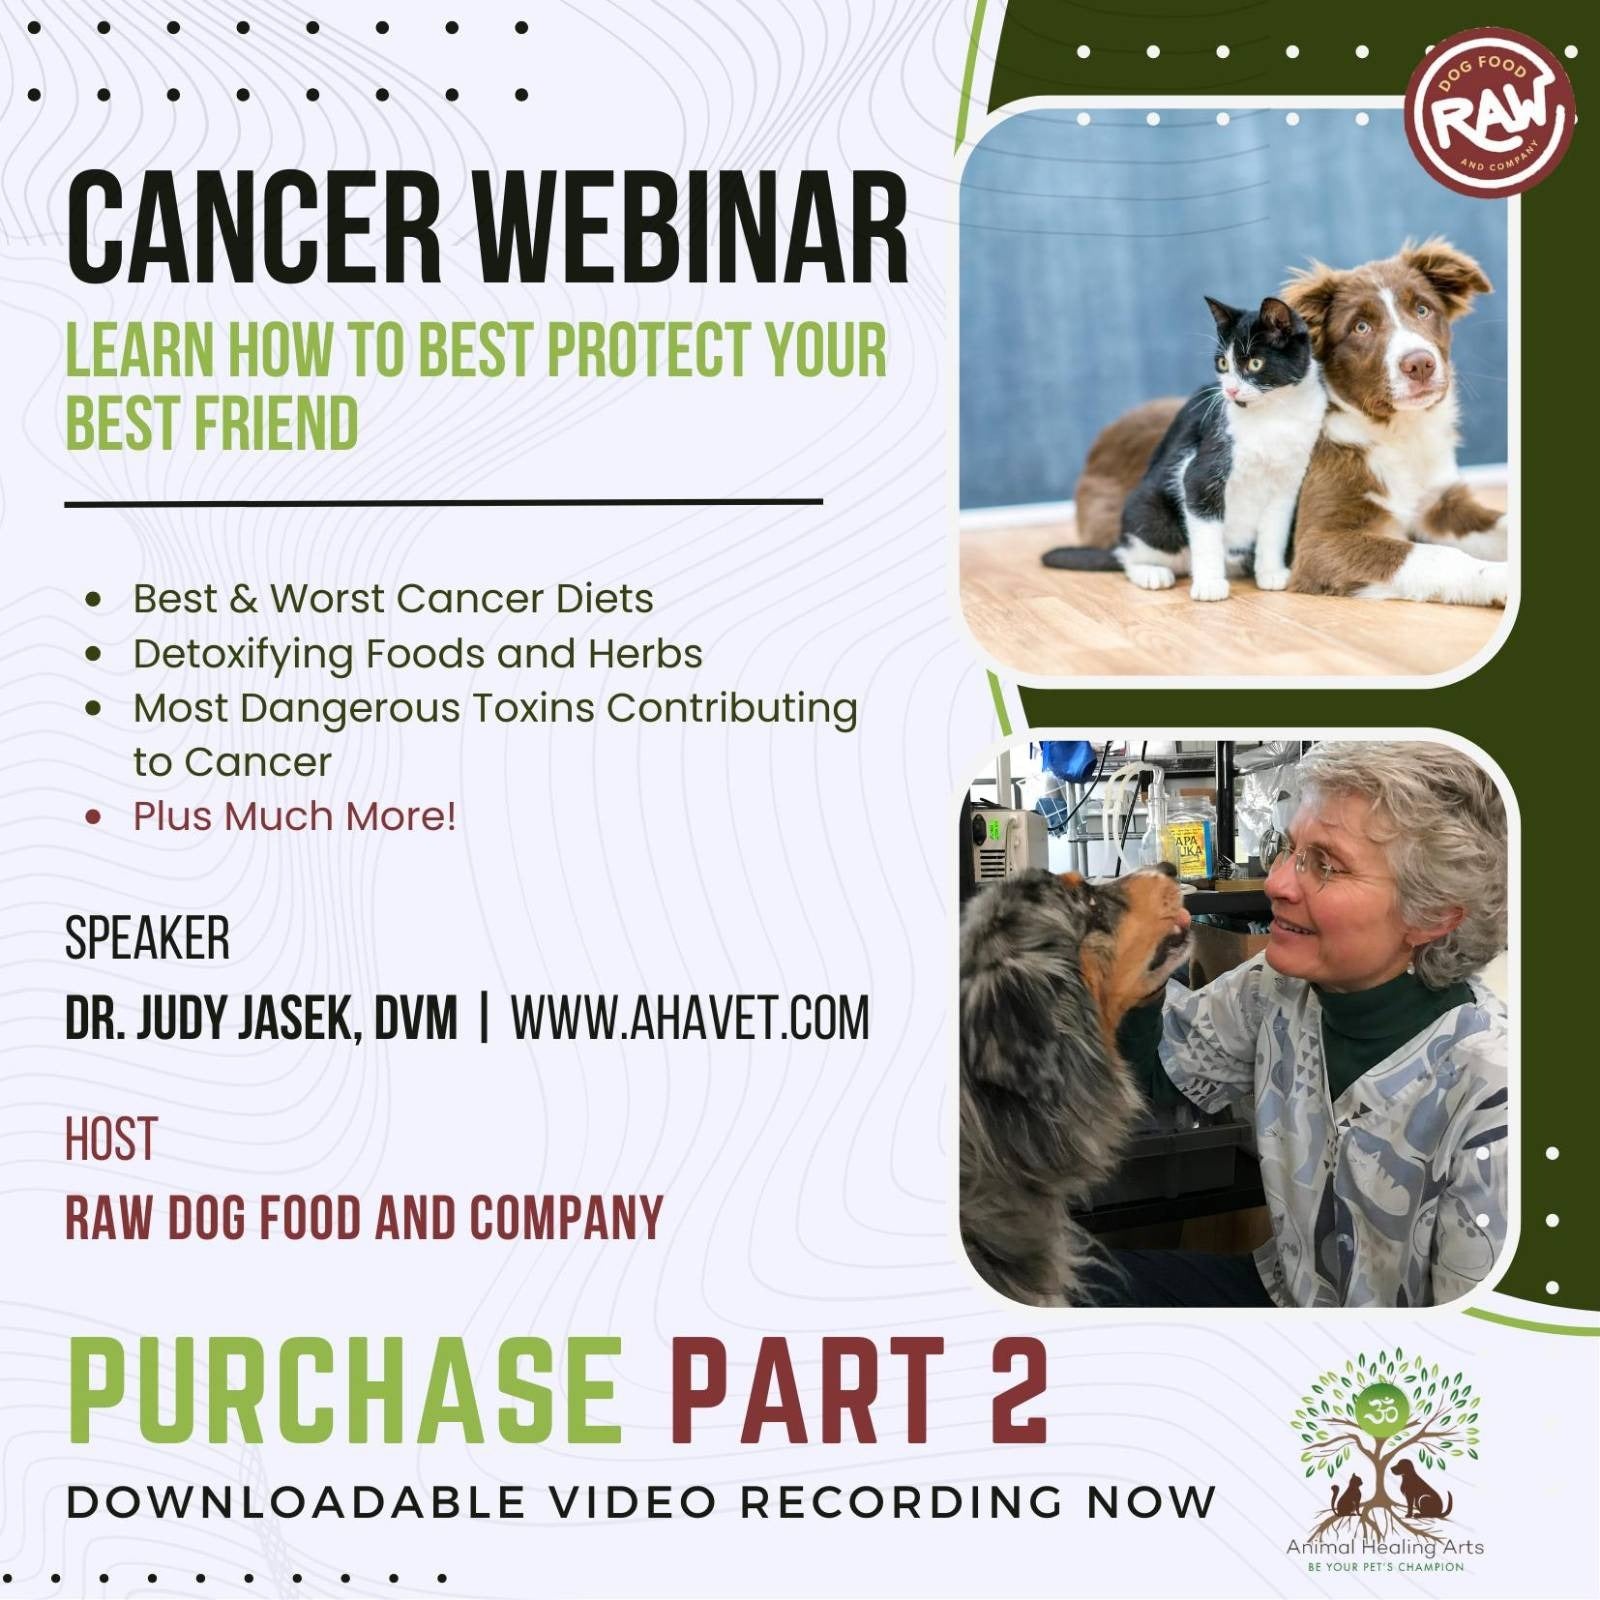 Products - Raw Dog Food and Company